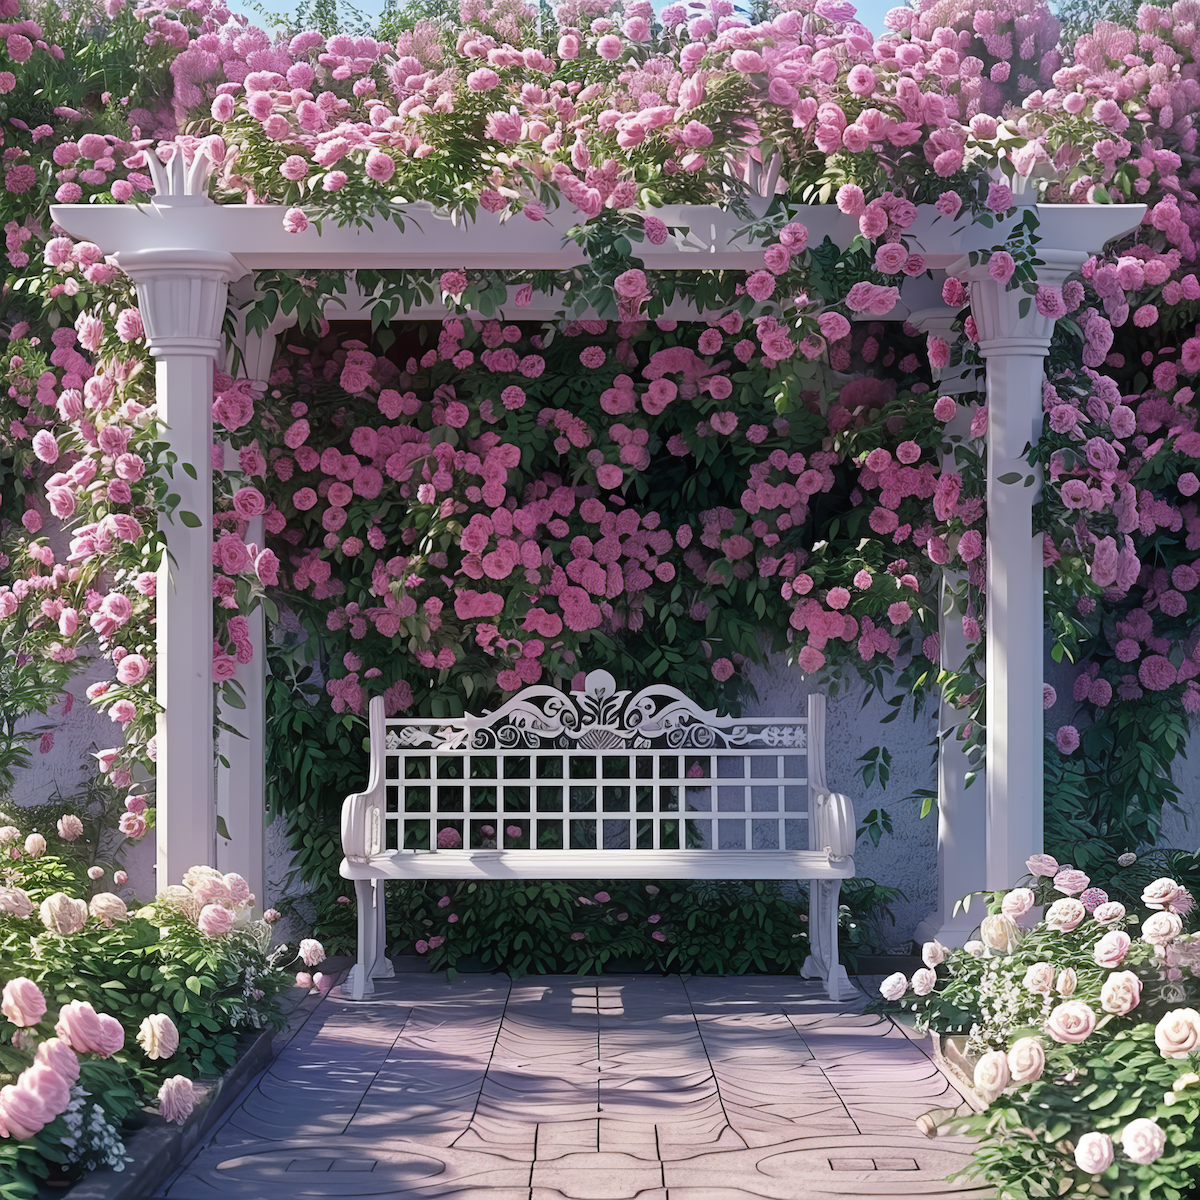 white bench under a trellis in a pink rose garden filled with pink rose blooms